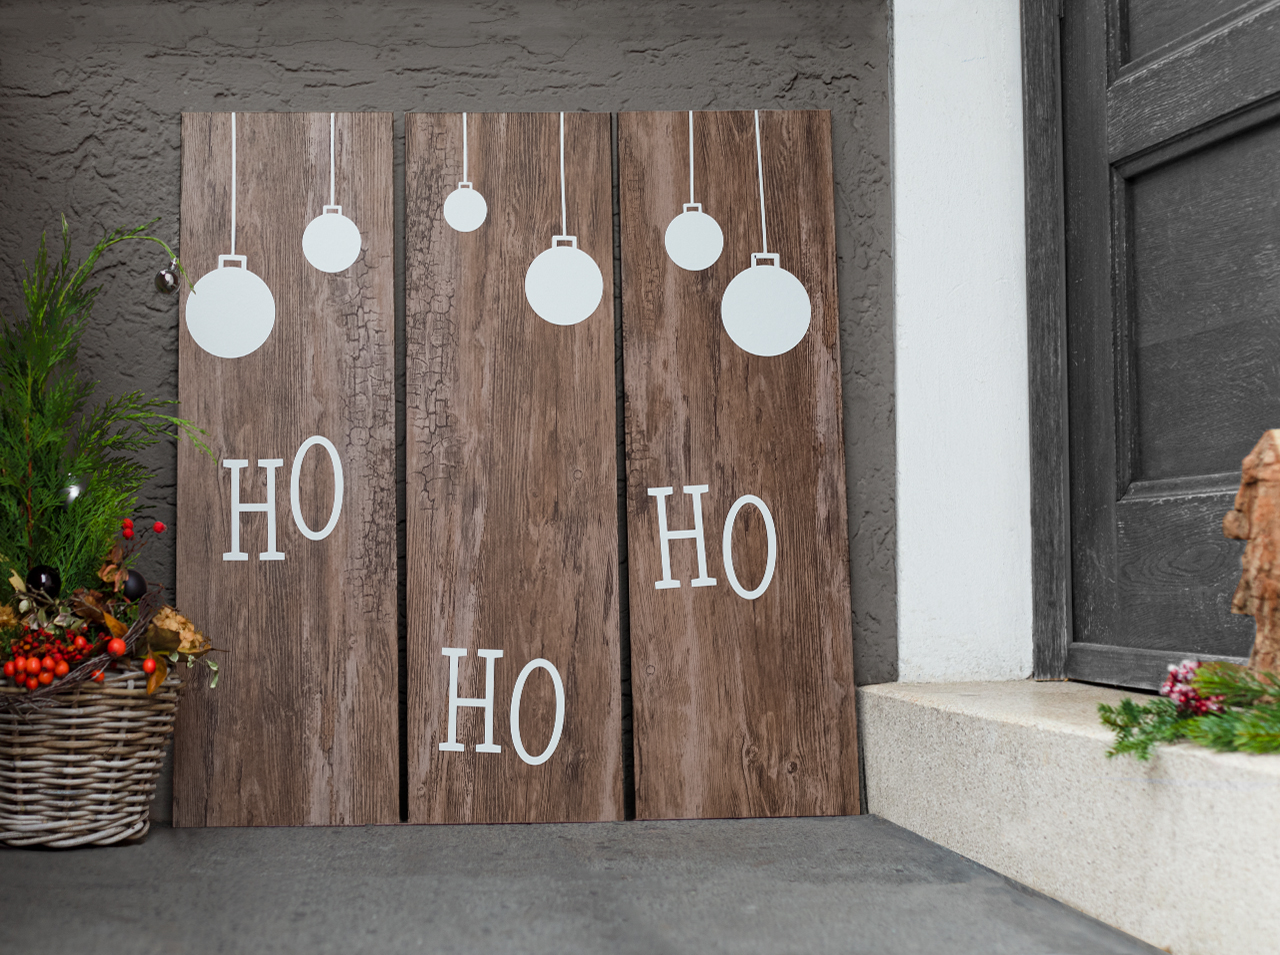 Three wooden slats covered with d-c-fix® Rustic adhesive foil in a rustic wood look and decorated with Christmas ornaments made of white adhesive foil.